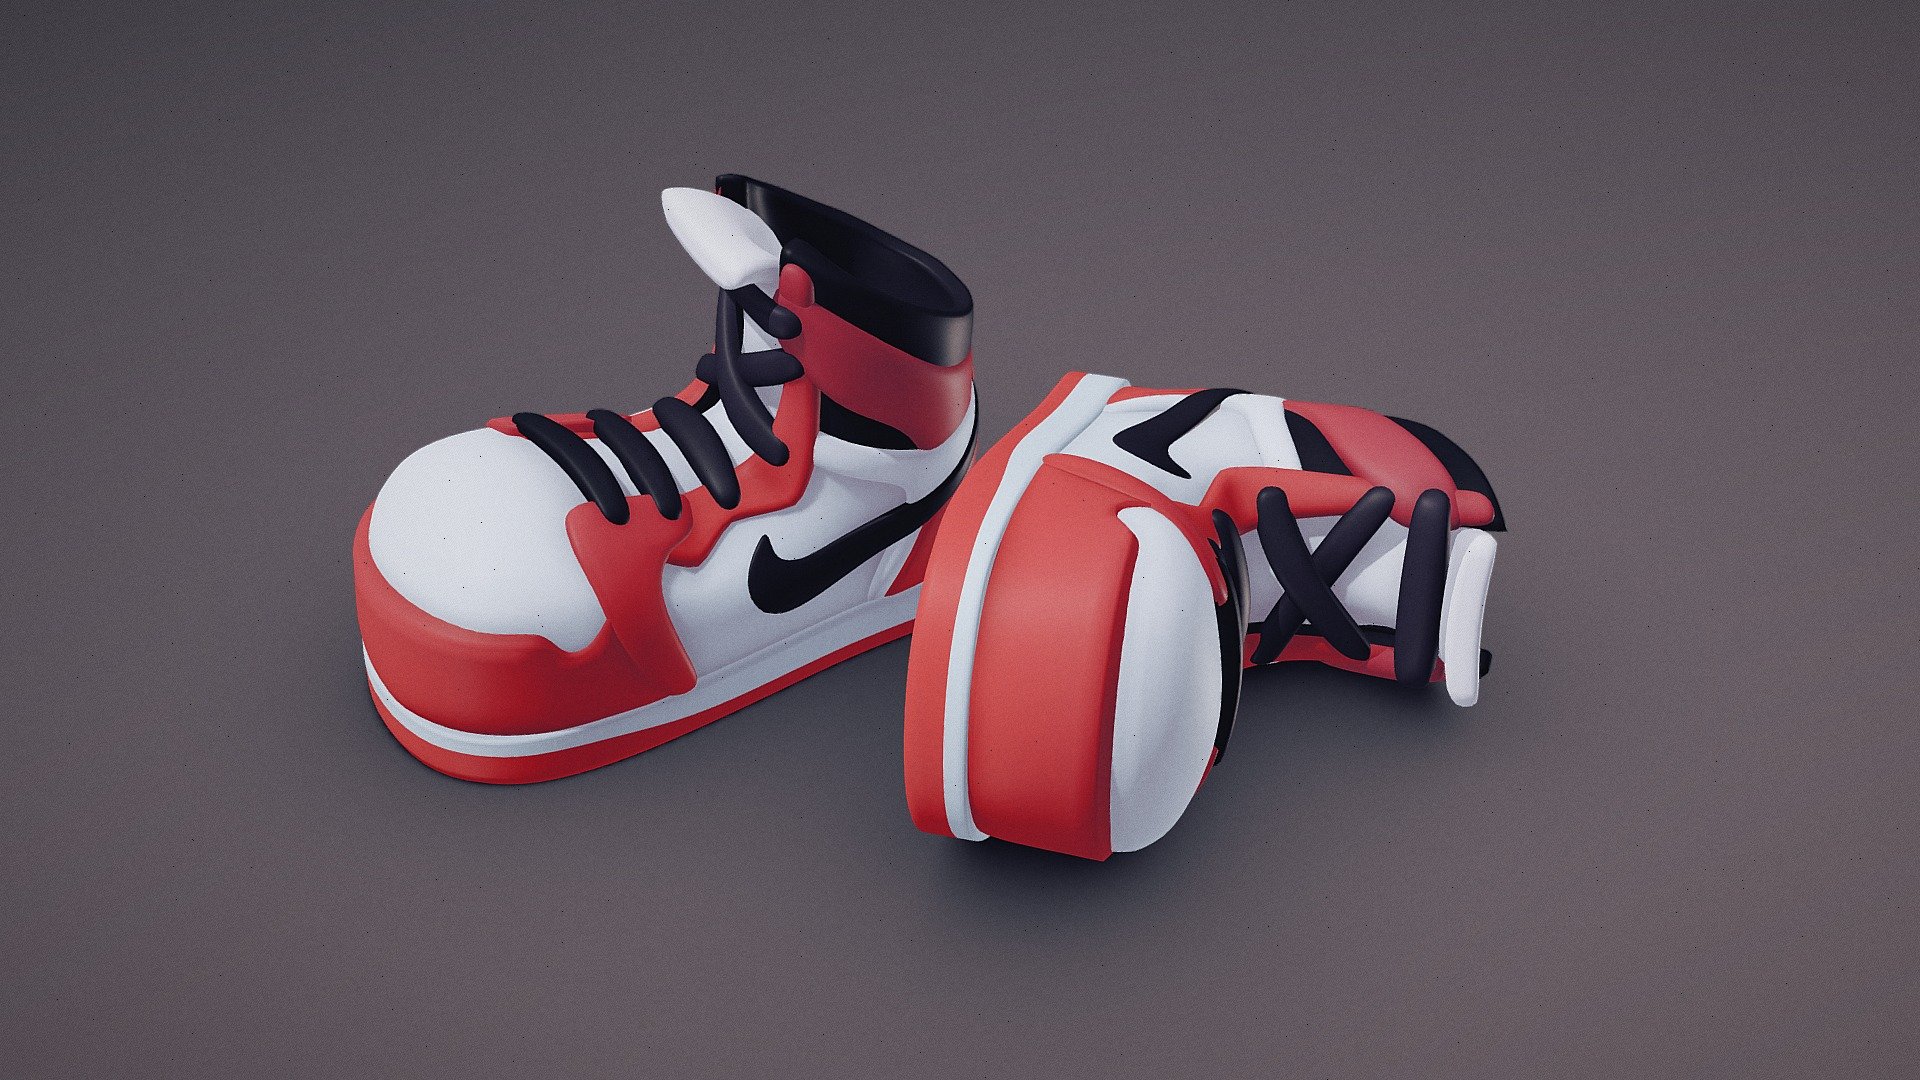 Had some free time to play around the new Blender and did these cute lil' sneaks. Hope you enjoy it! ;) - Air Jordan Retro 1 sneakers - 3D model by nk (@nkow) 3d model